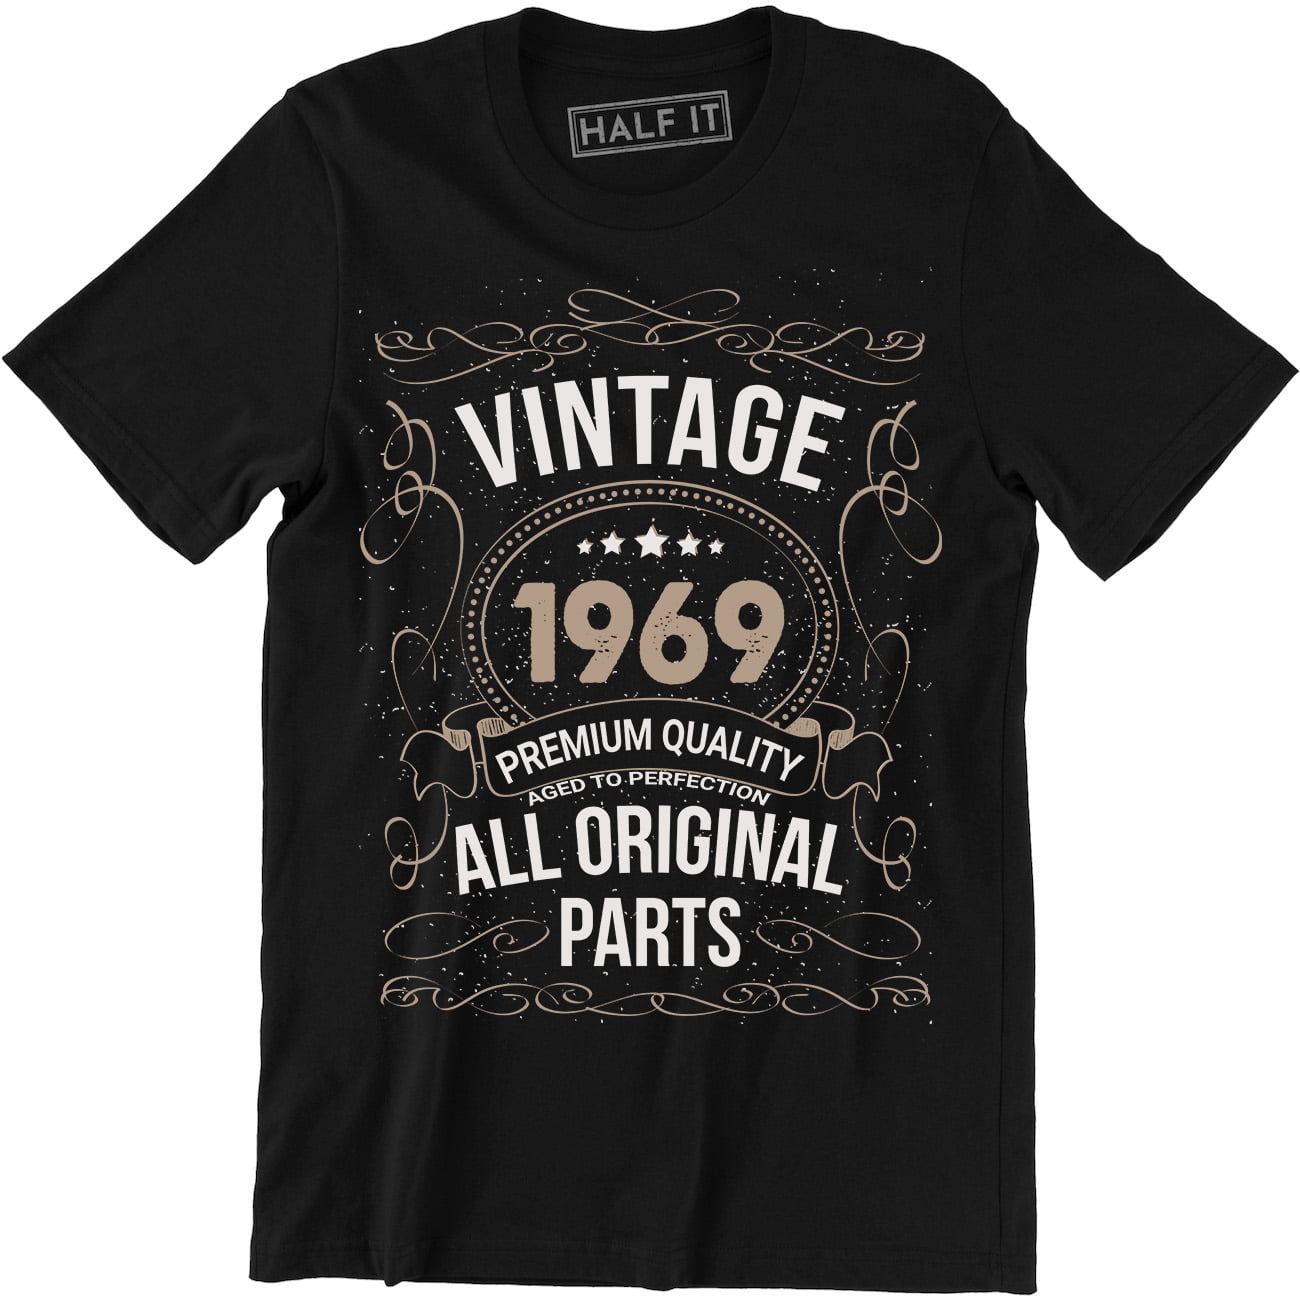 Men's adult t-shirt Happy 50th Birthday shirt Made in 1969